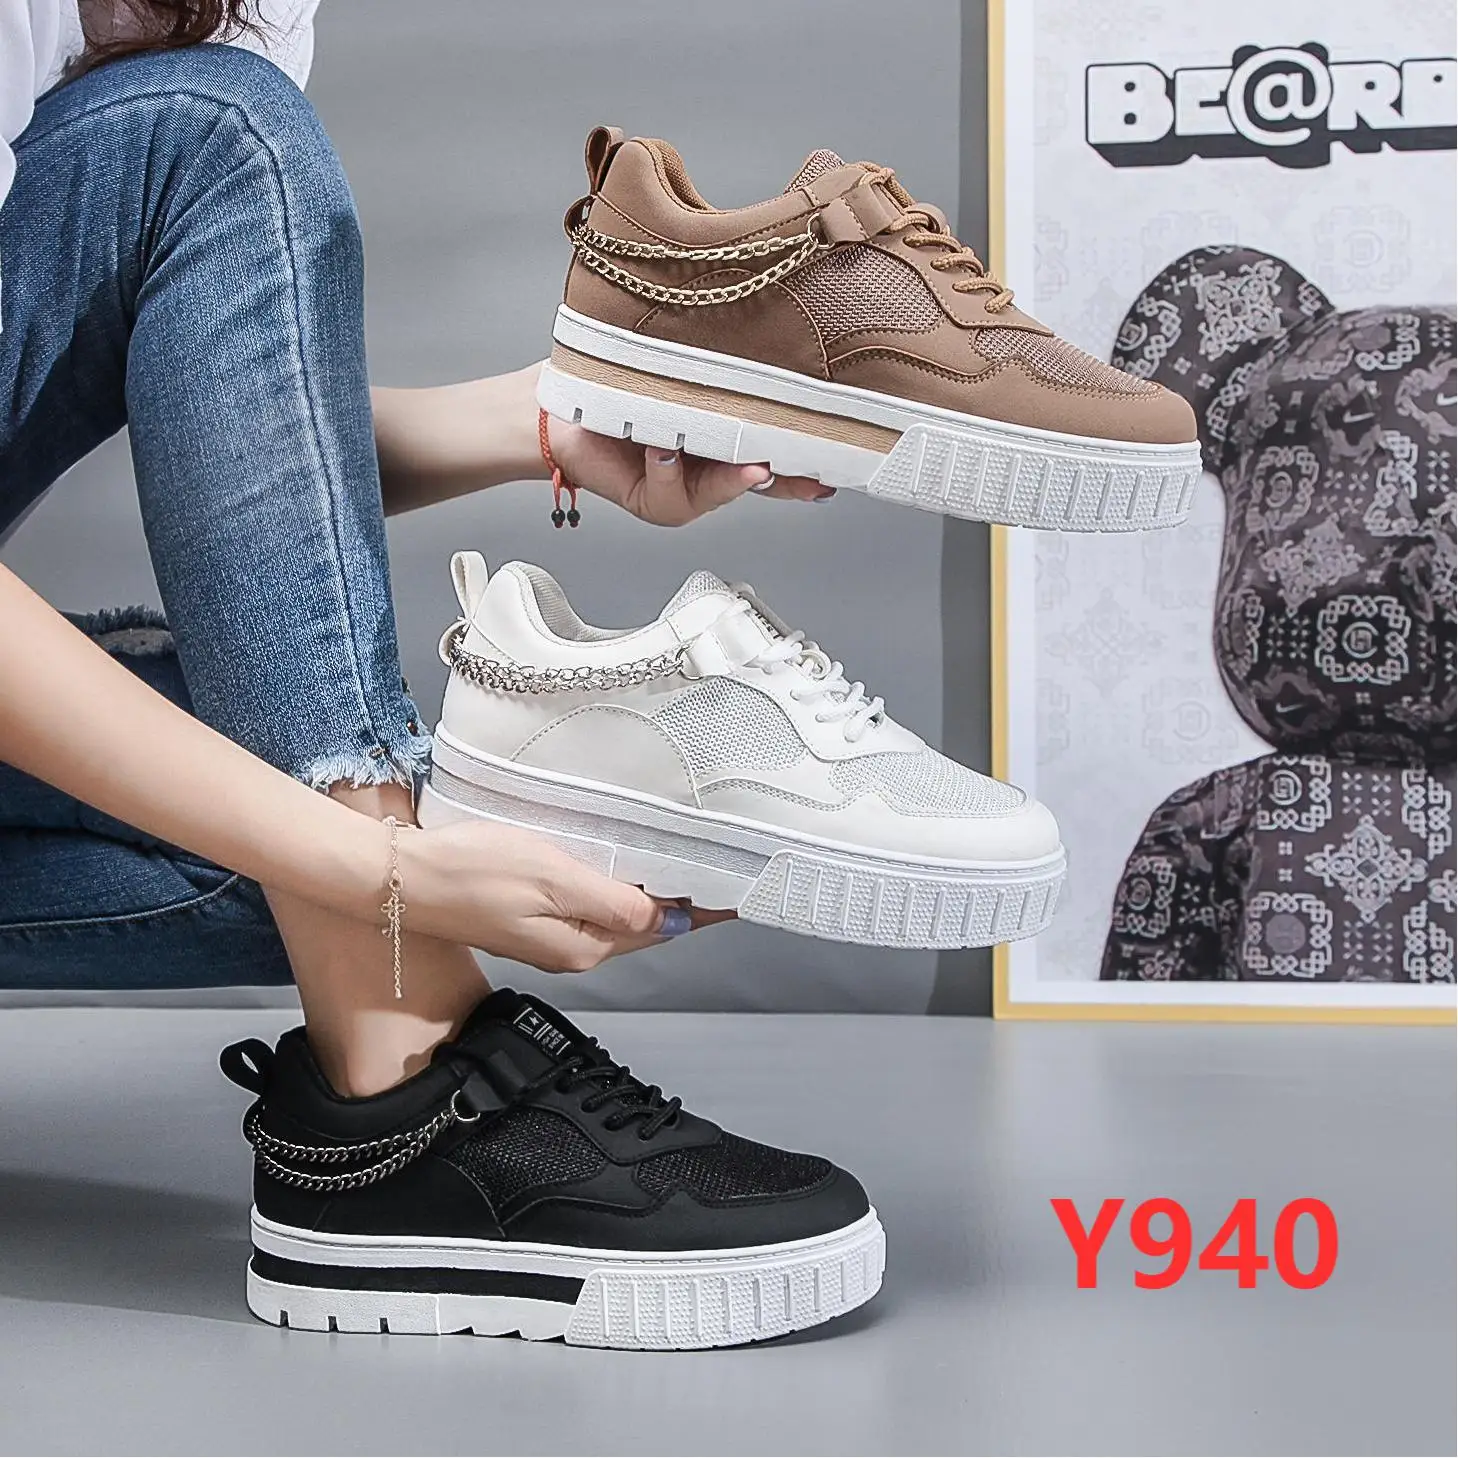 2022 Suede Pantshoes Shoes Metal chain Running Sneakers Girls Lace Up PU Fashion Casual shoes